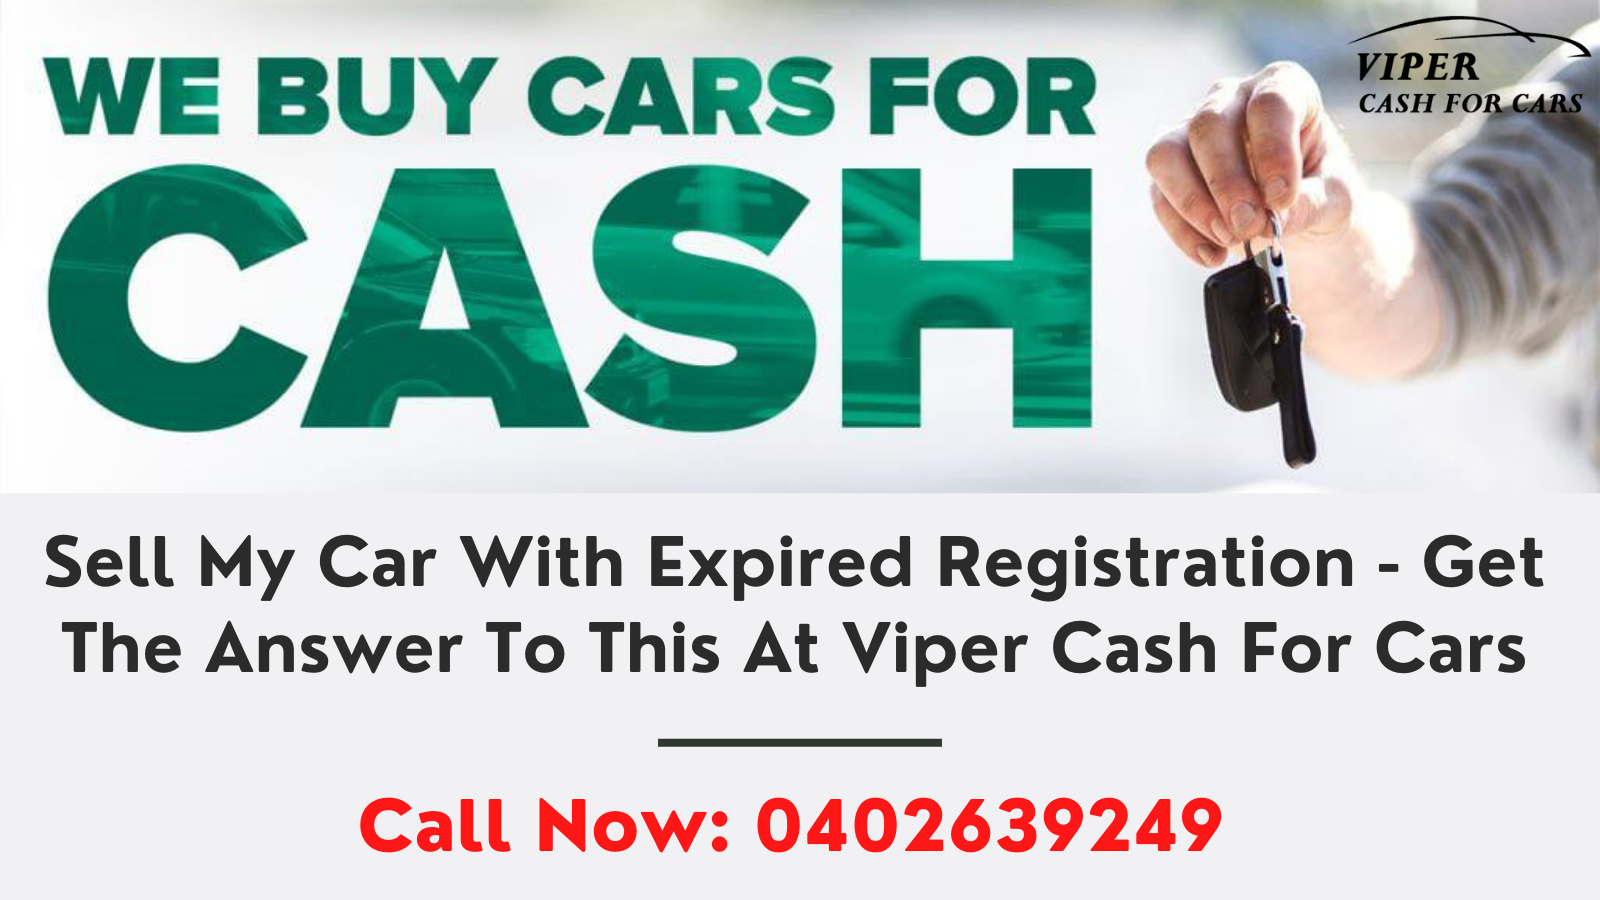 Sell My Car With Expired Registration – Get The Answer To This At Viper Cash For Cars